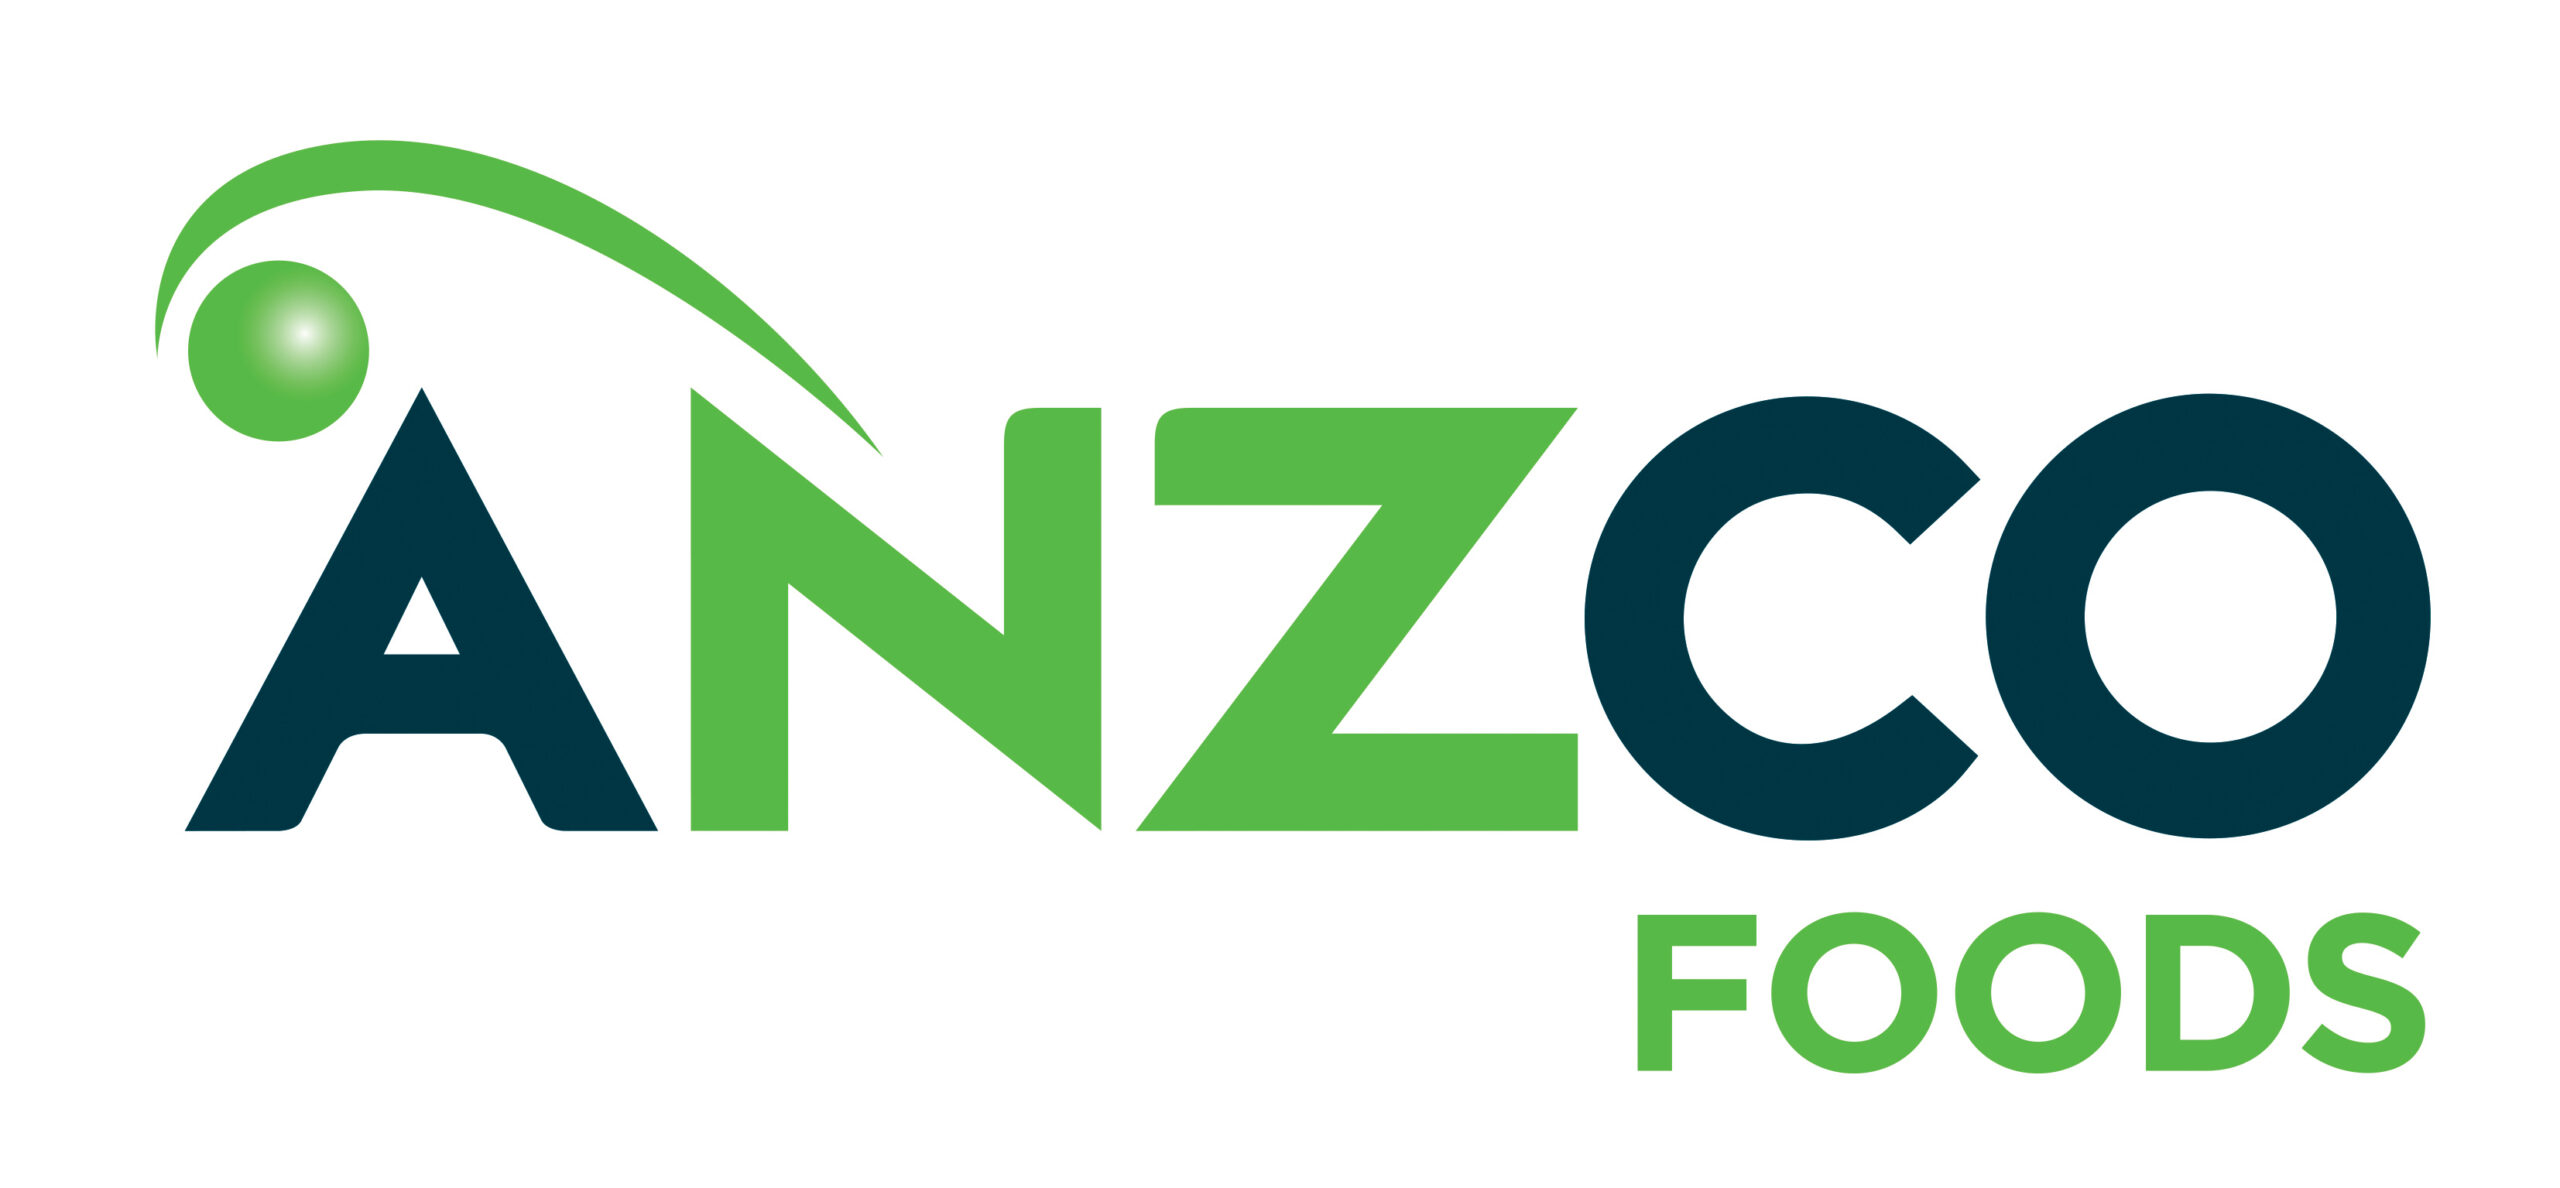 ANZCO supplies the world with some of the finest beef and lamb from New Zealand. ANZCO is committed to delivering the best of the best – grass-fed beef that’s healthy, lean, and tender. Enjoy a nutritious product with succulent flavour that chefs and consumers can trust with ANZCO.